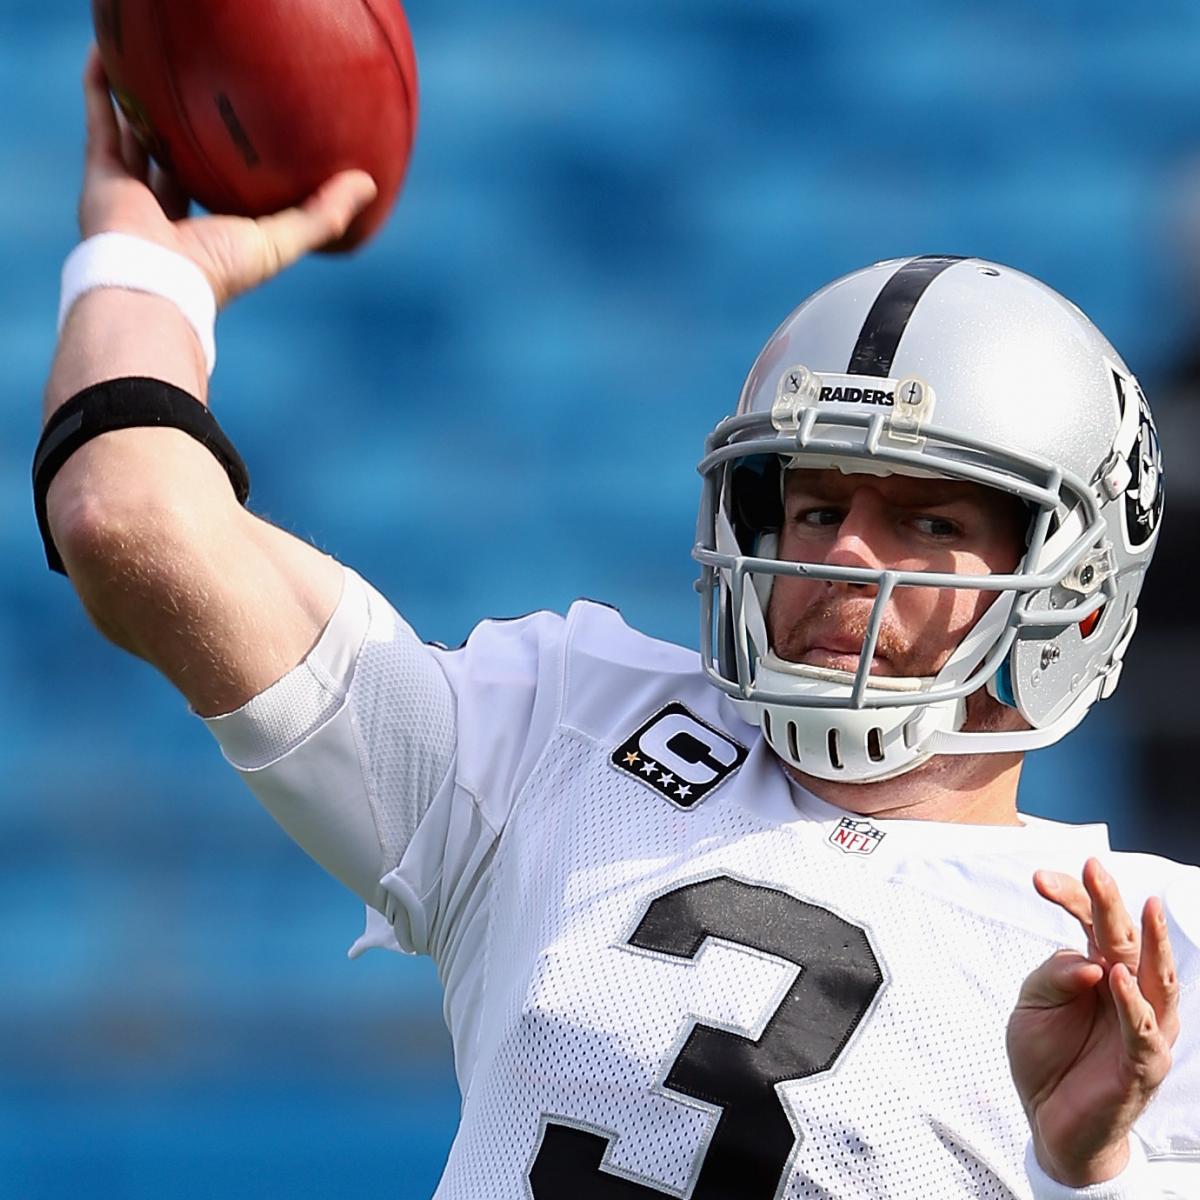 Oakland Raiders' QB Situation Growing More Unclear with Each Passing